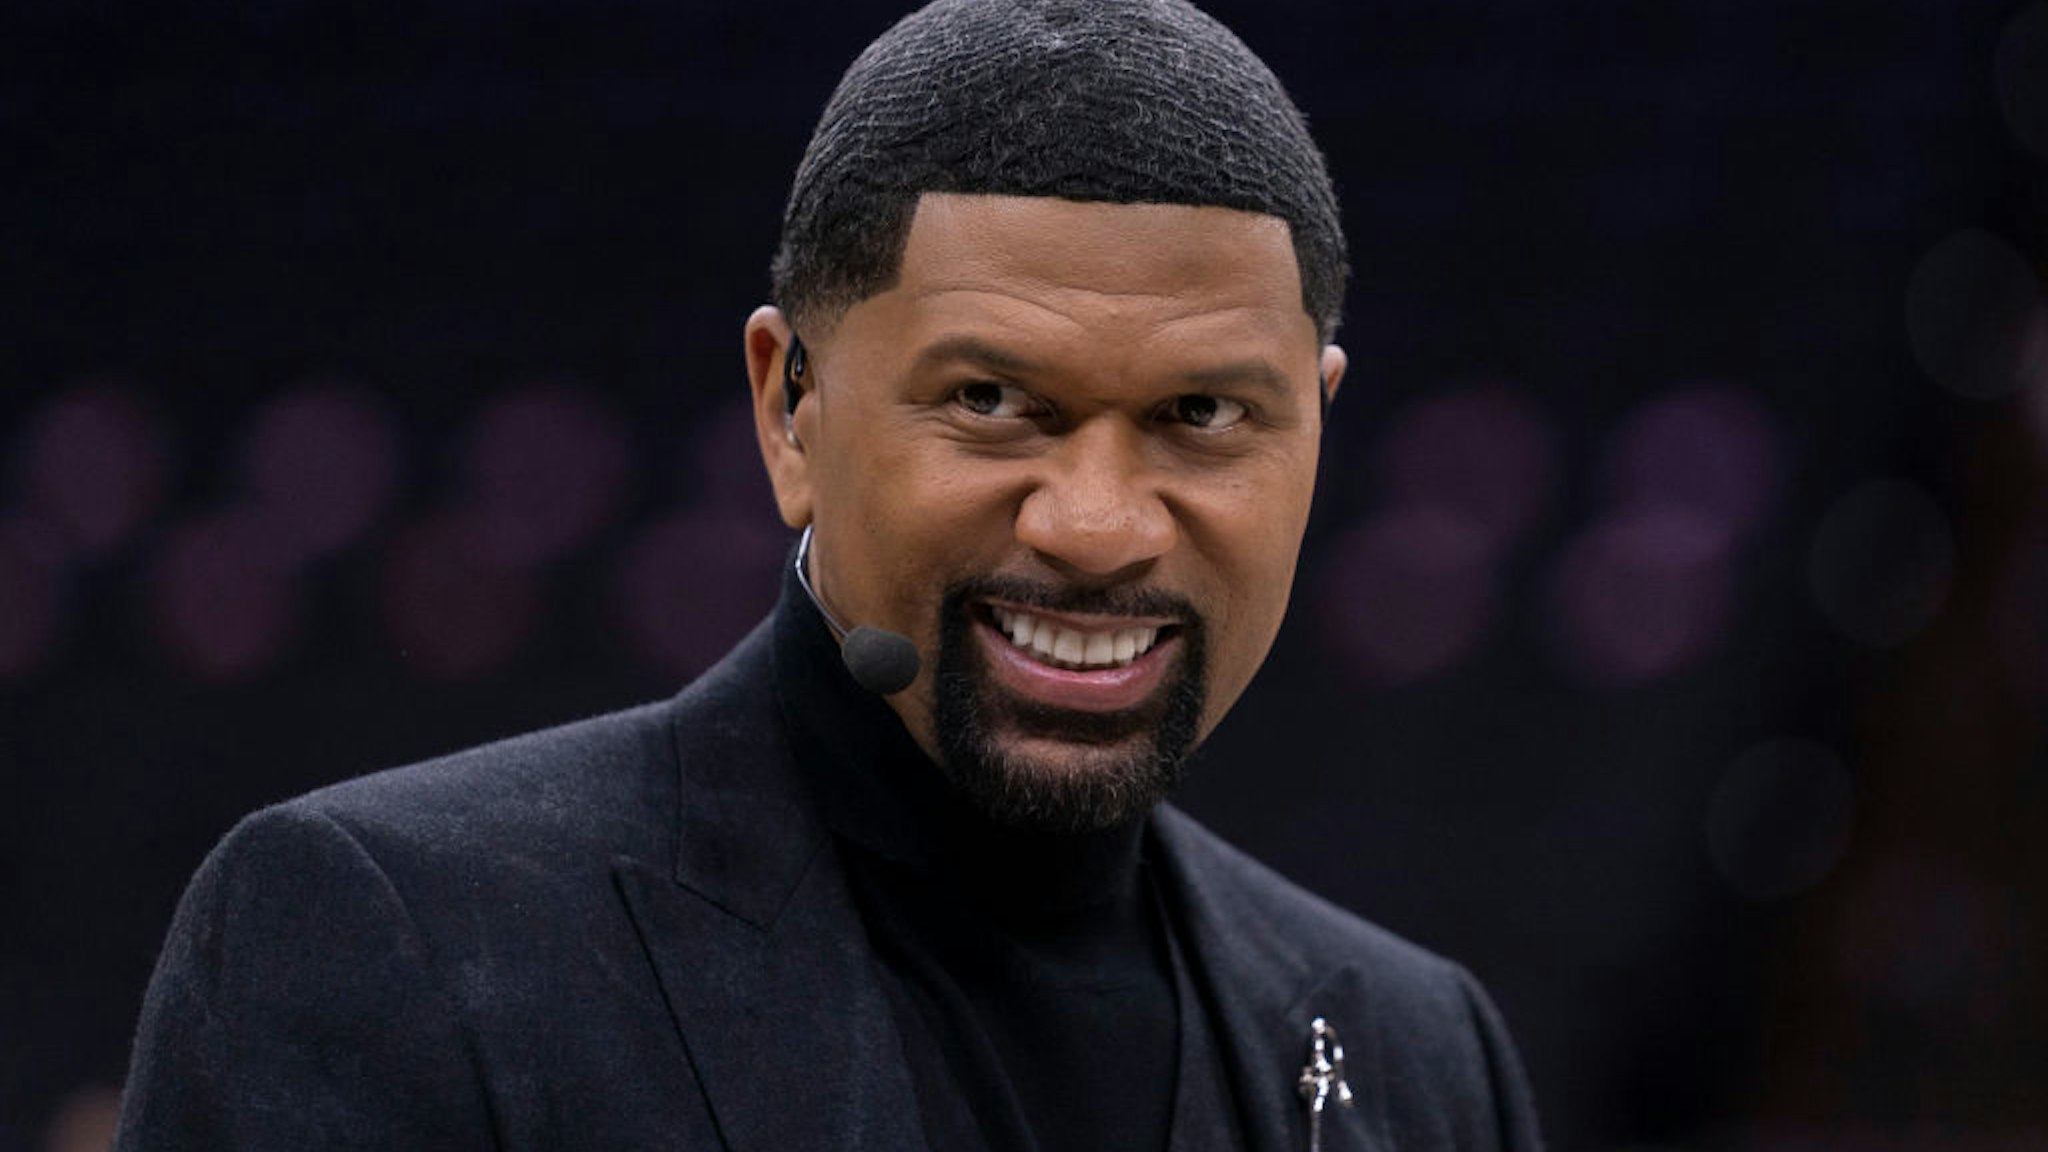 ESPN analyst Jalen Rose looks on prior to the game between the Los Angeles Lakers and Philadelphia 76ers at the Wells Fargo Center on January 25, 2020 in Philadelphia, Pennsylvania.